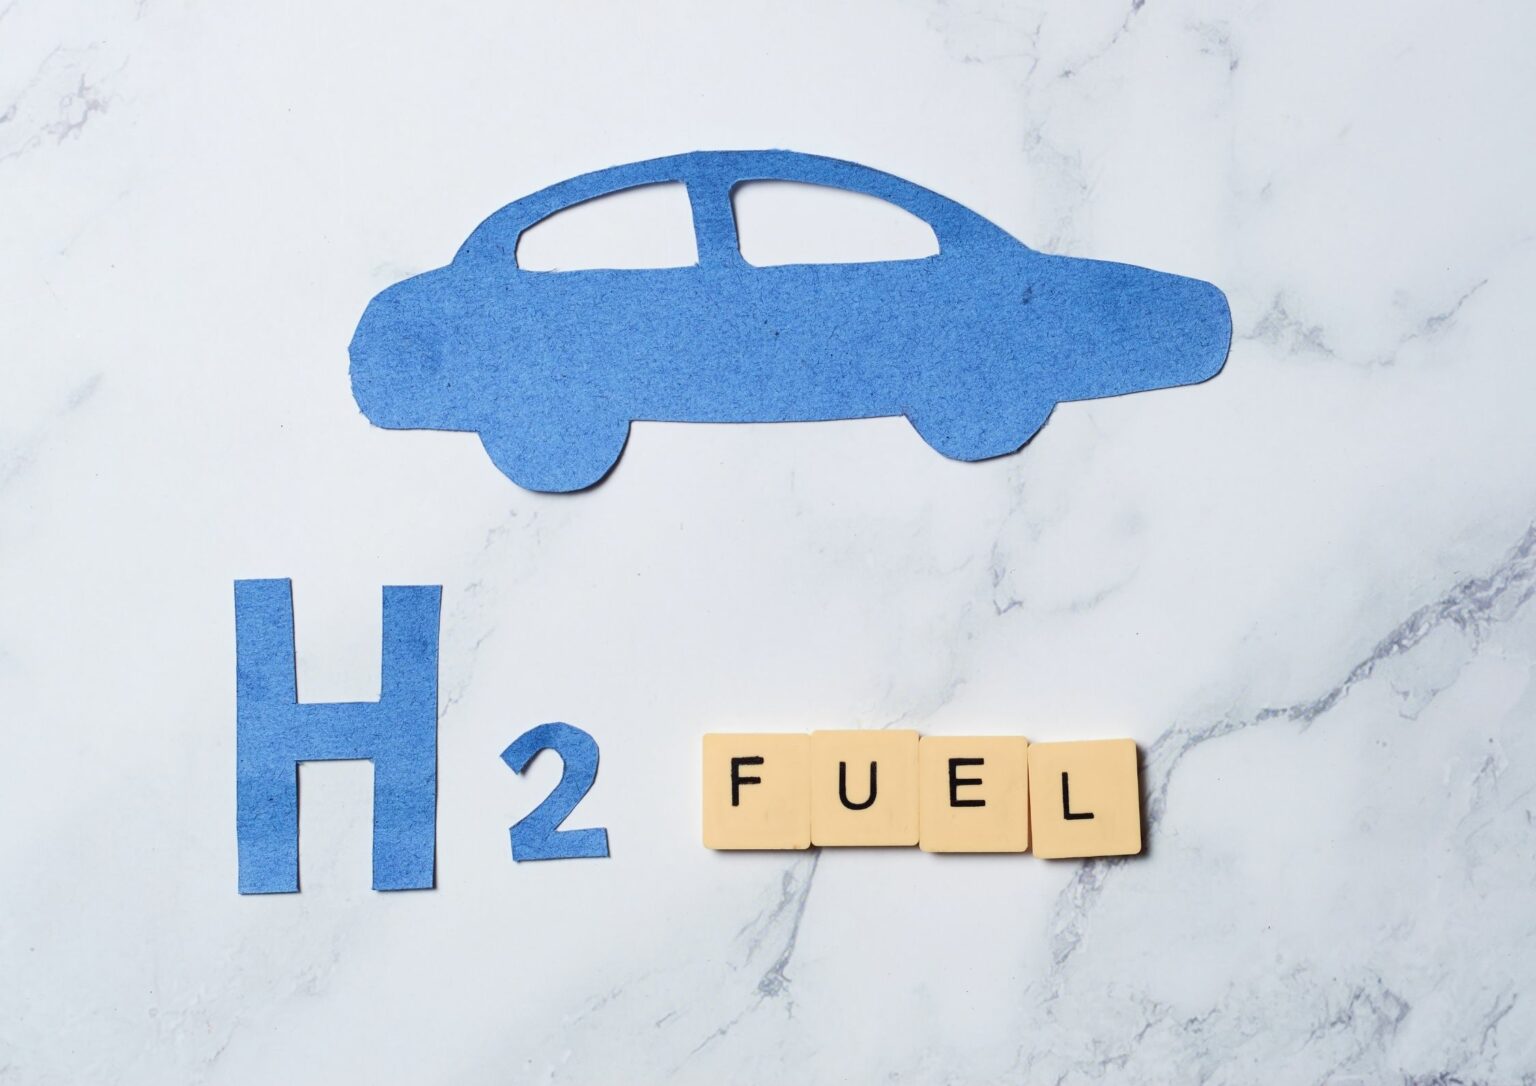 Texas Energy Companies Bet on Hydrogen as Cleaner Transportation Fuel